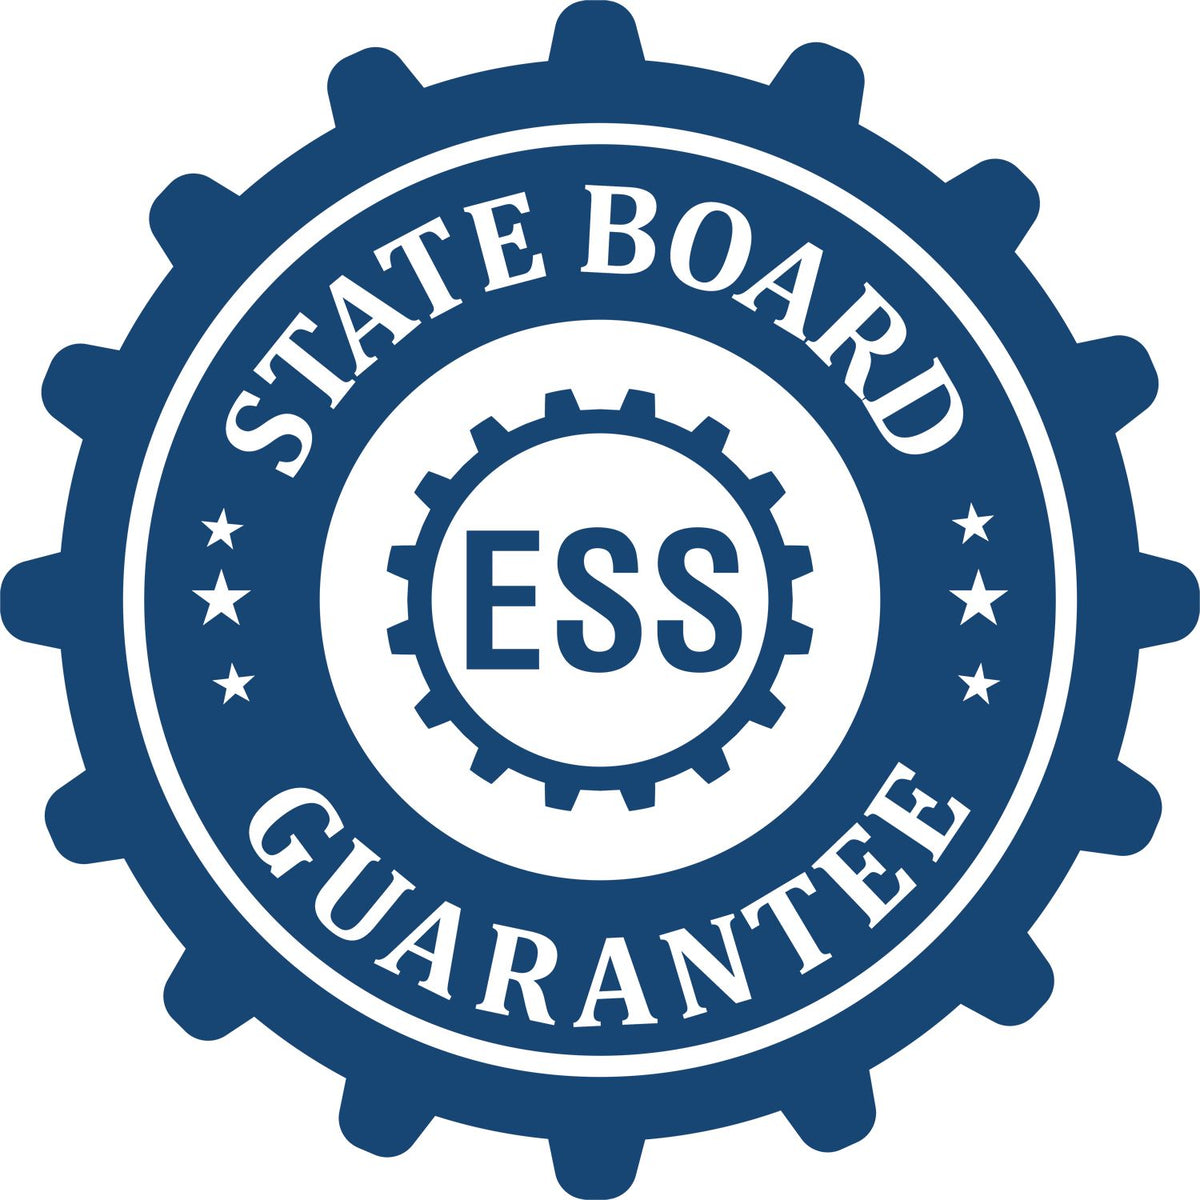 An emblem in a gear shape illustrating a state board guarantee for the Premium MaxLight Pre-Inked Mississippi Landscape Architectural Stamp product.